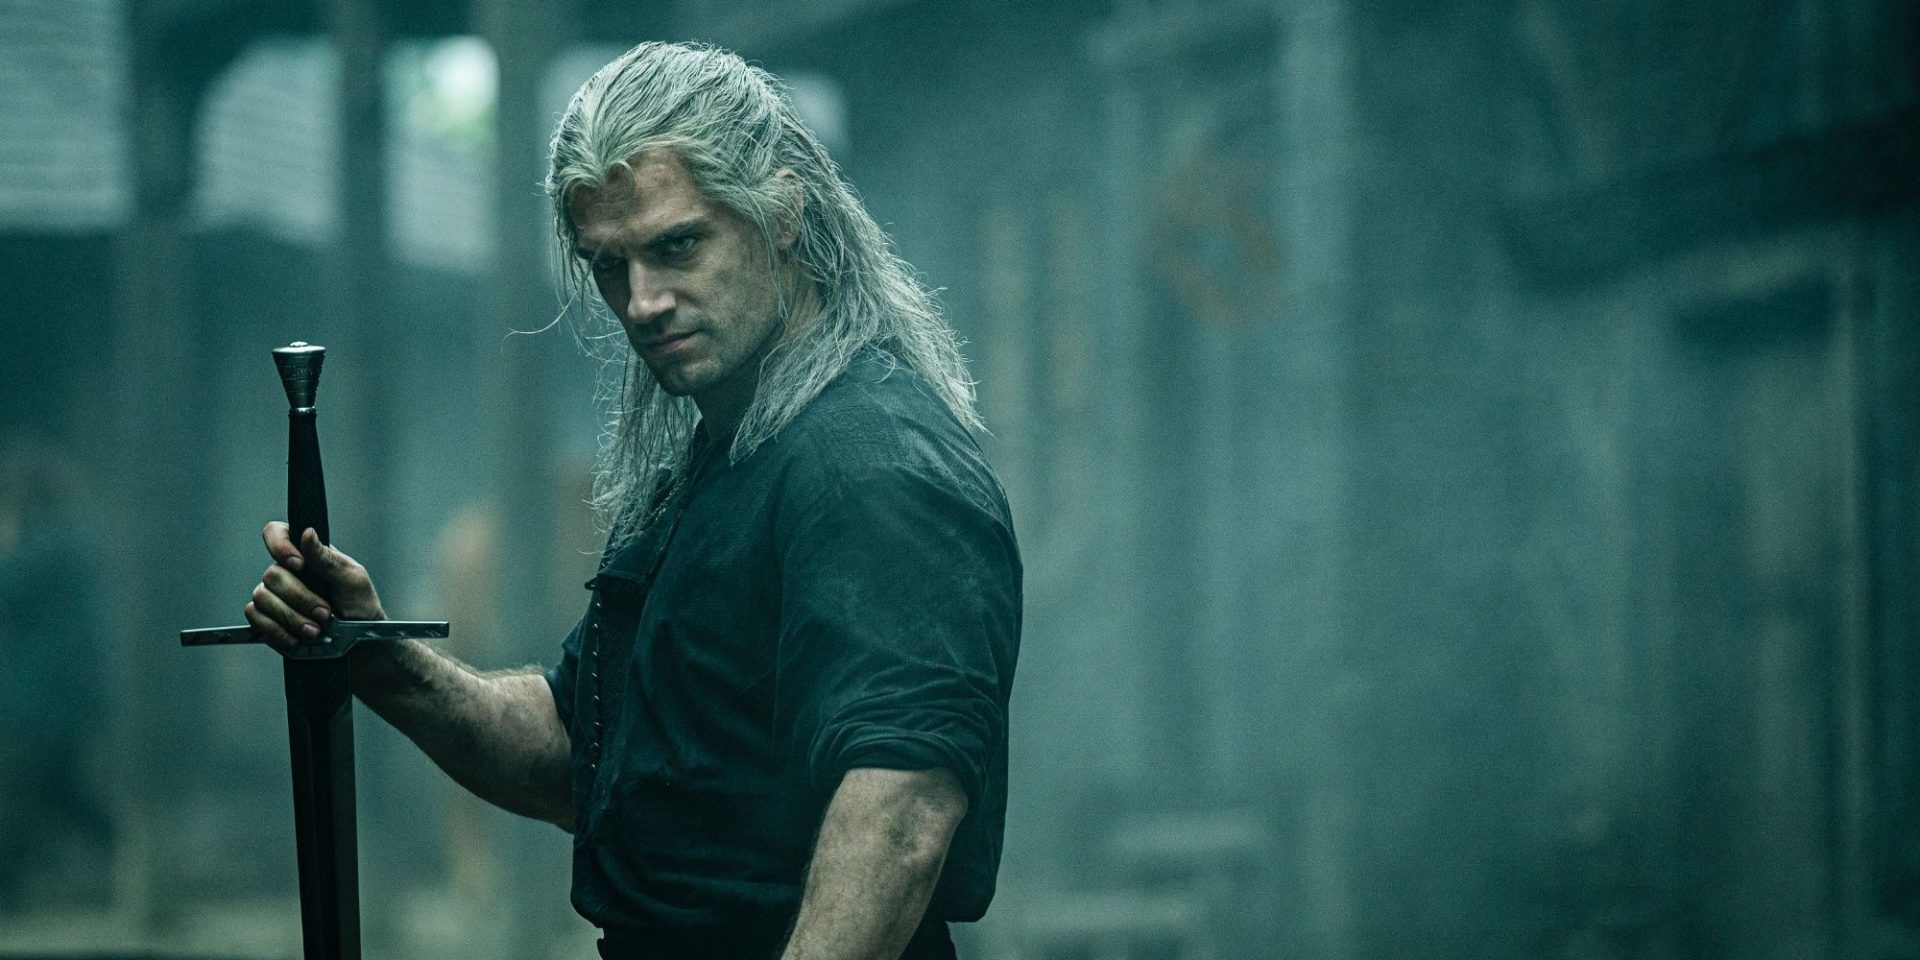 Henry Cavill in Netflix's The Witcher looking ready for battle